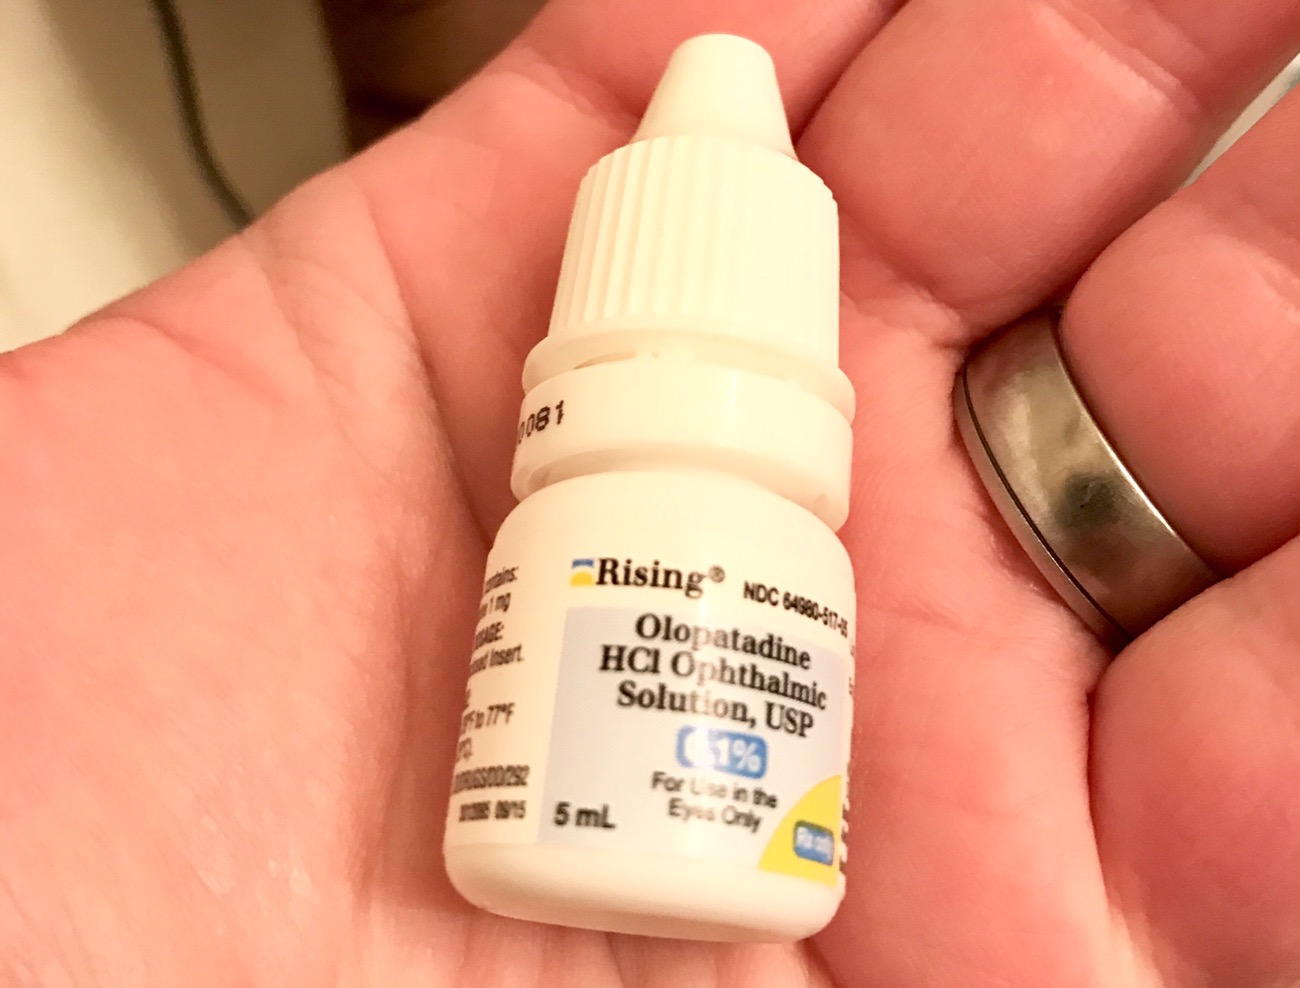 A hand holding a 5ml bottle of olopatadine eye drops